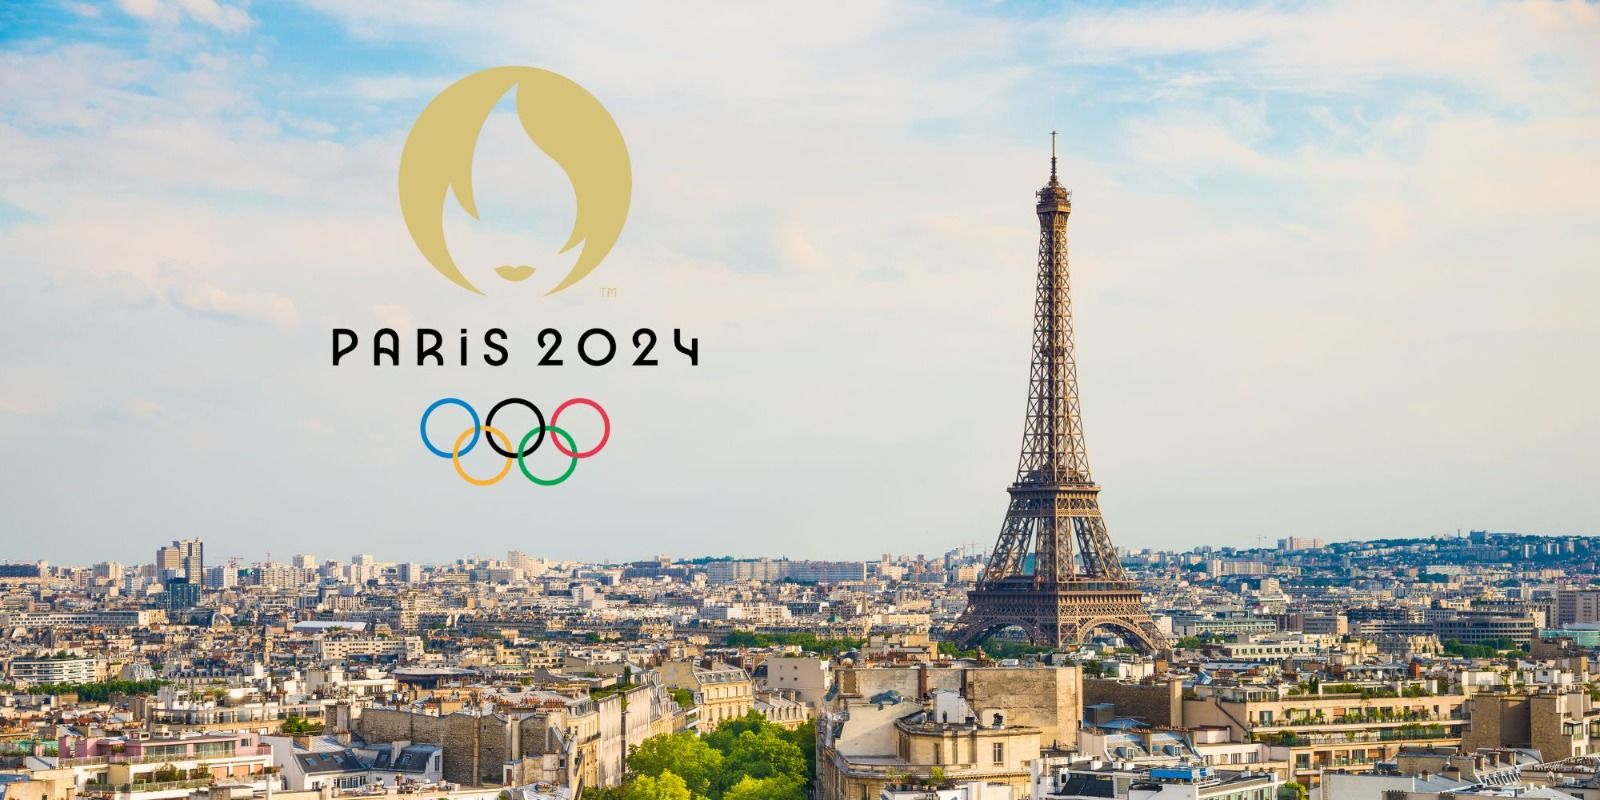 Paris Olympics 2024: Event Budget, Tickets, Where to Watch, and What to Bet On